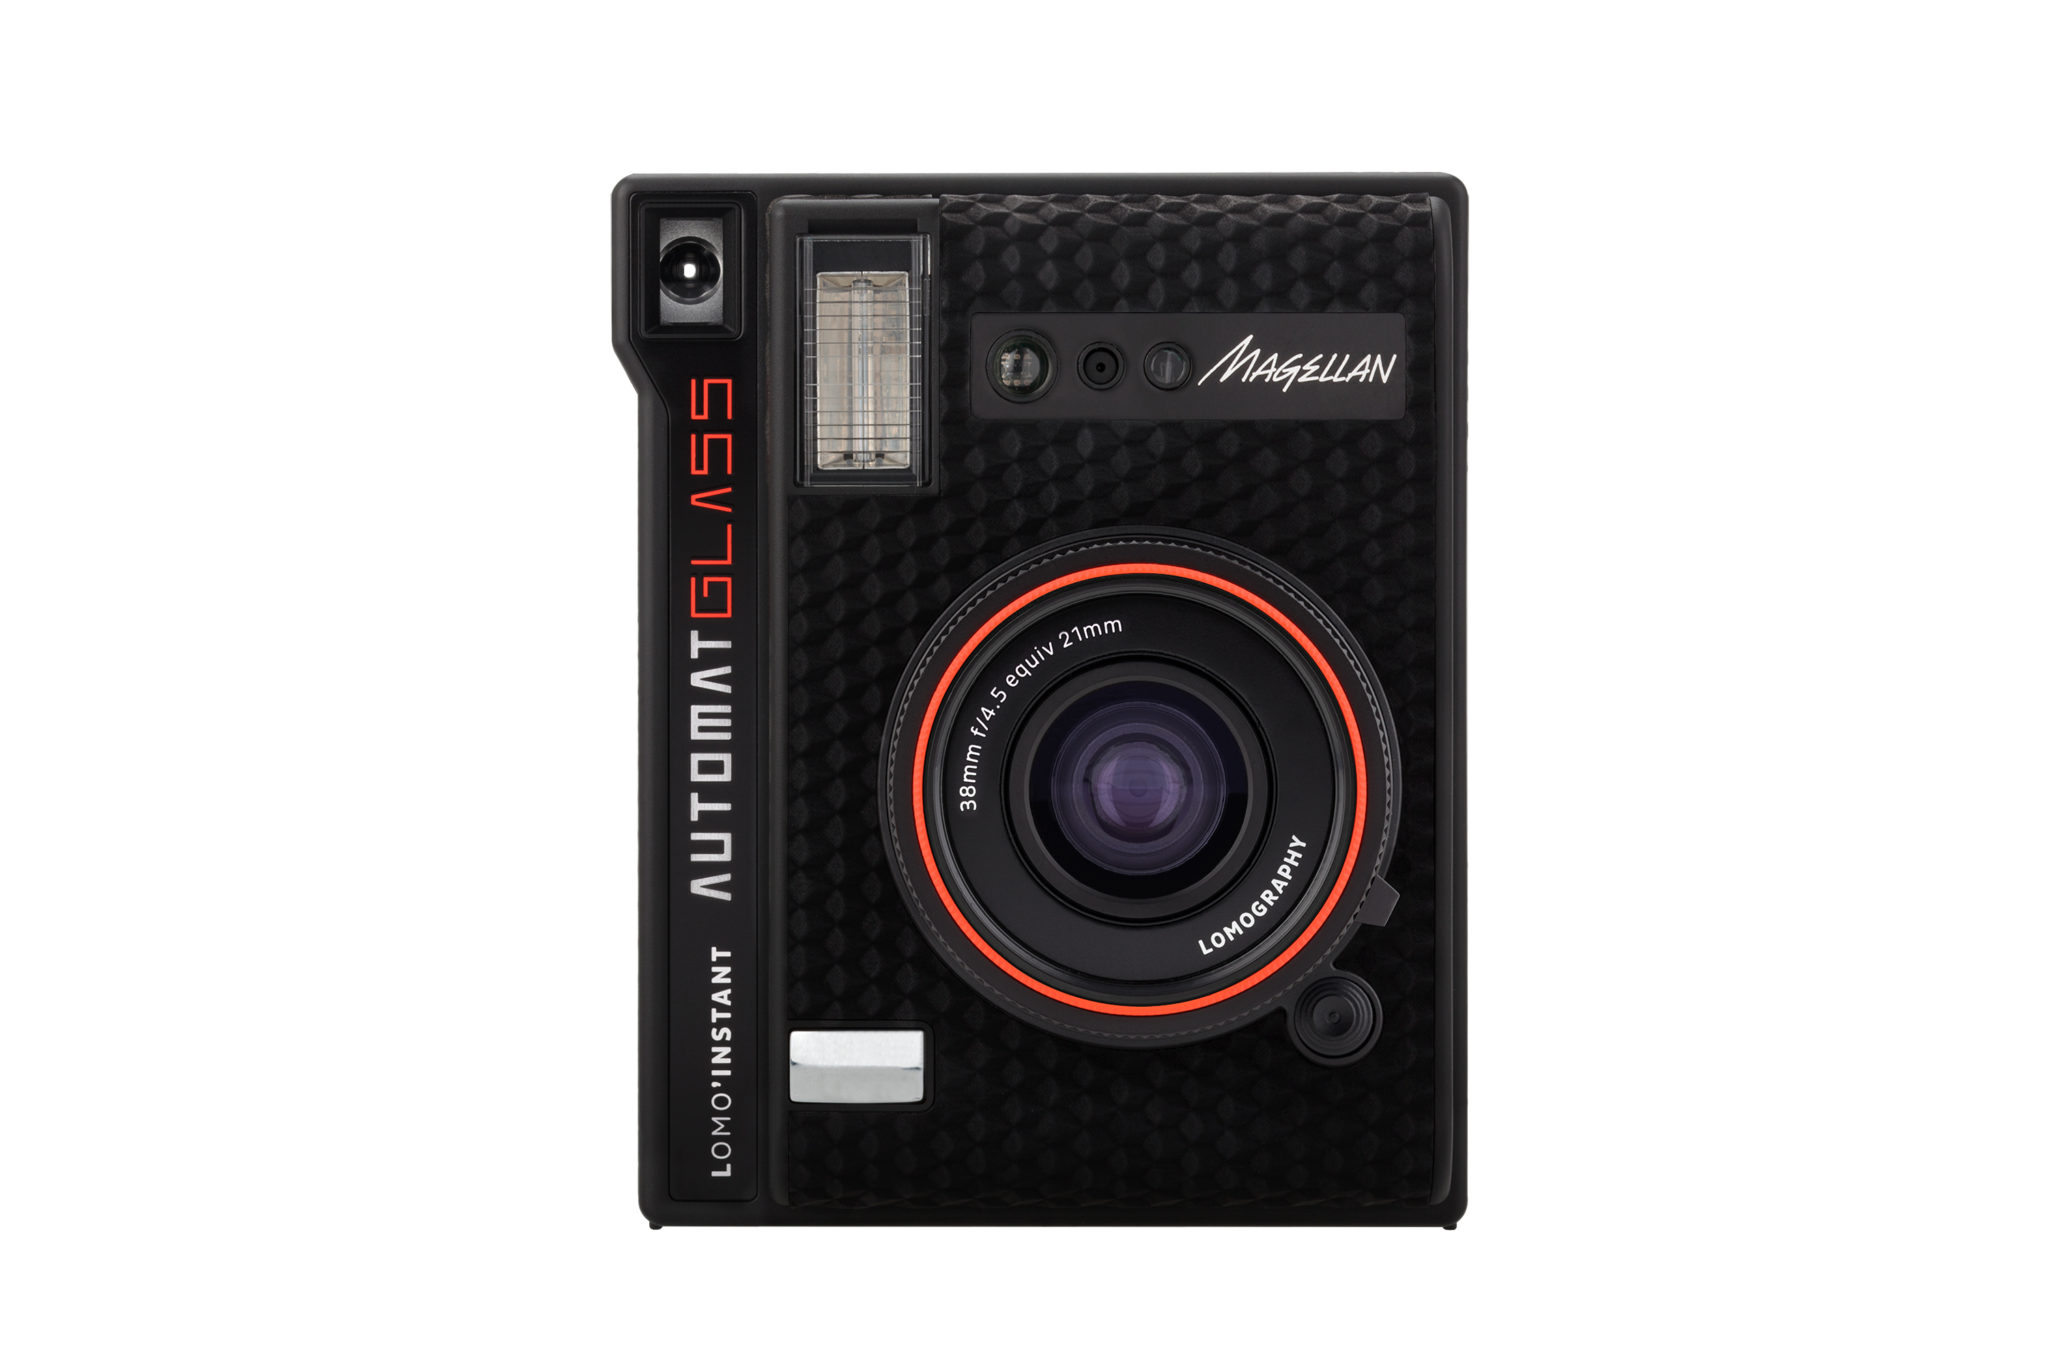 The Lomo'Instant Automat Glass Shoots Instax Film with an f4.5 Glass Lens